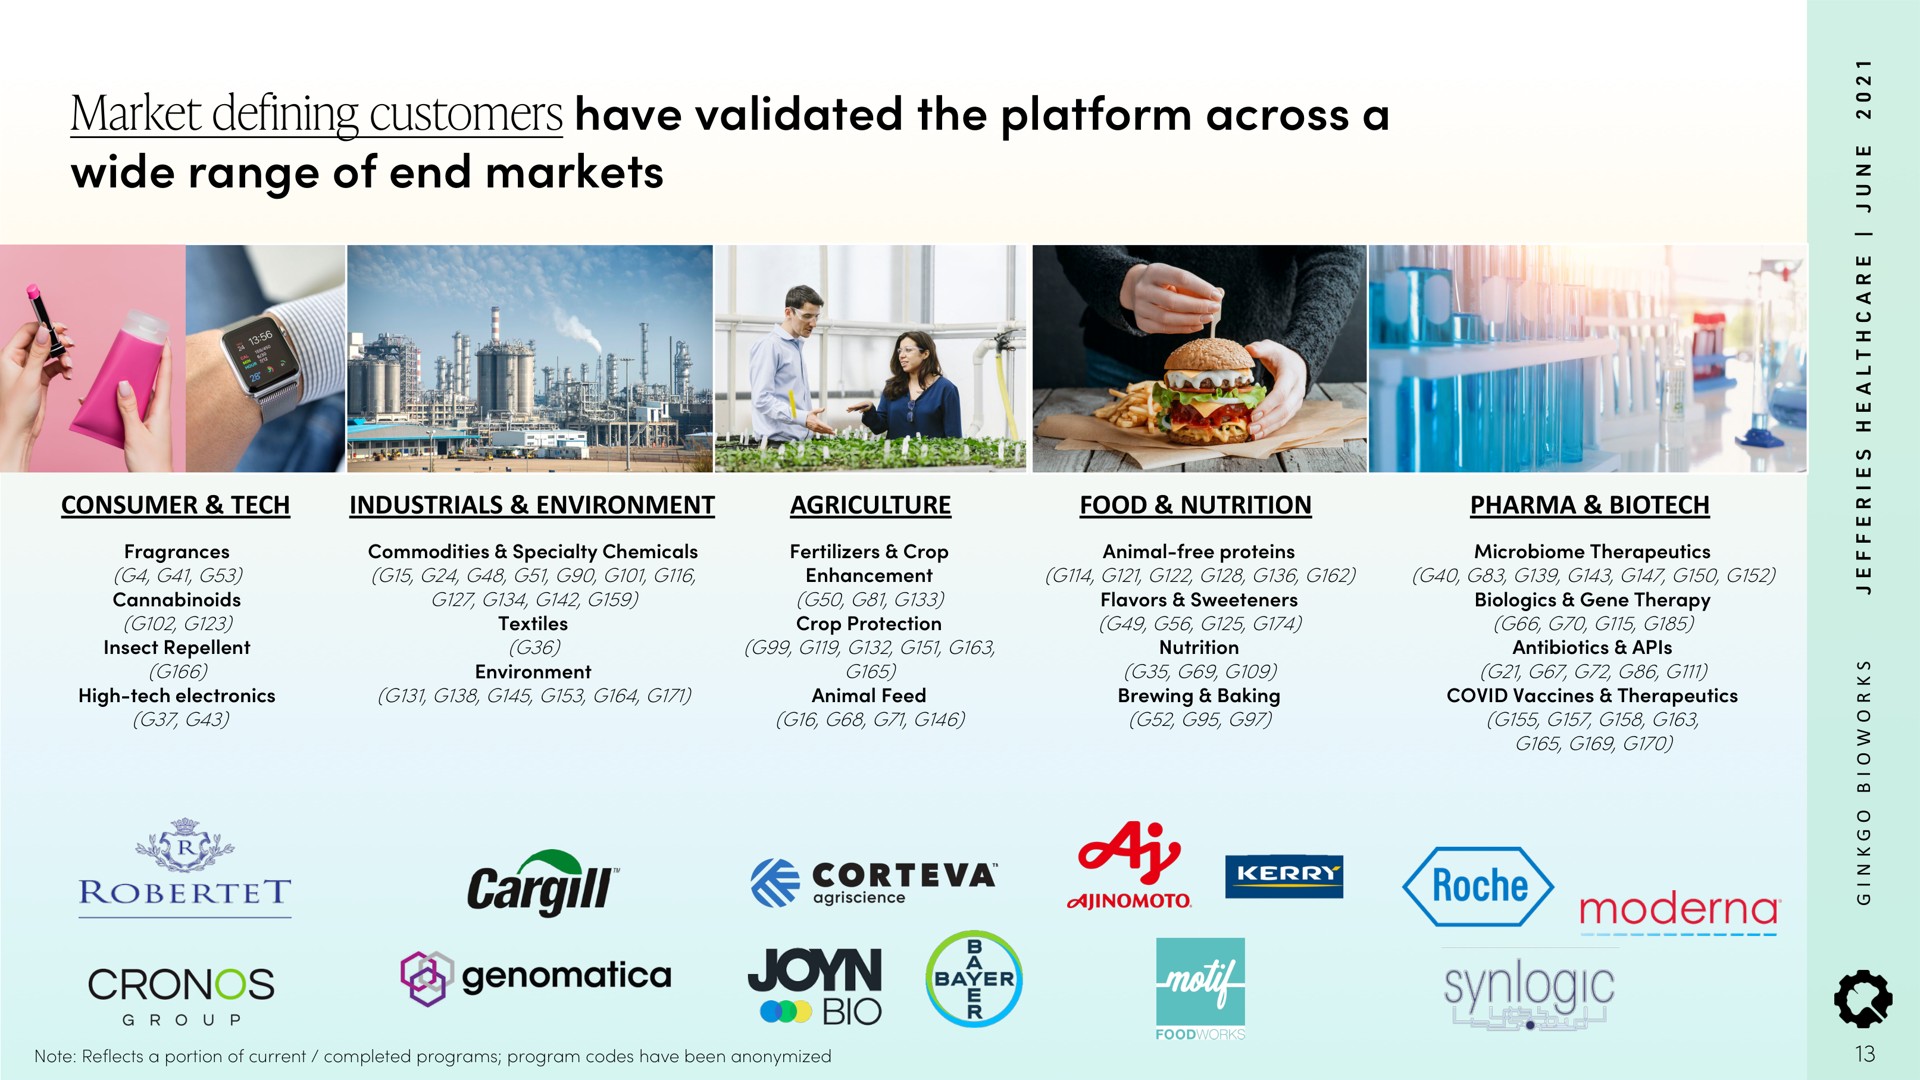 market defining customers have validated the platform across a wide range of end markets | Ginkgo